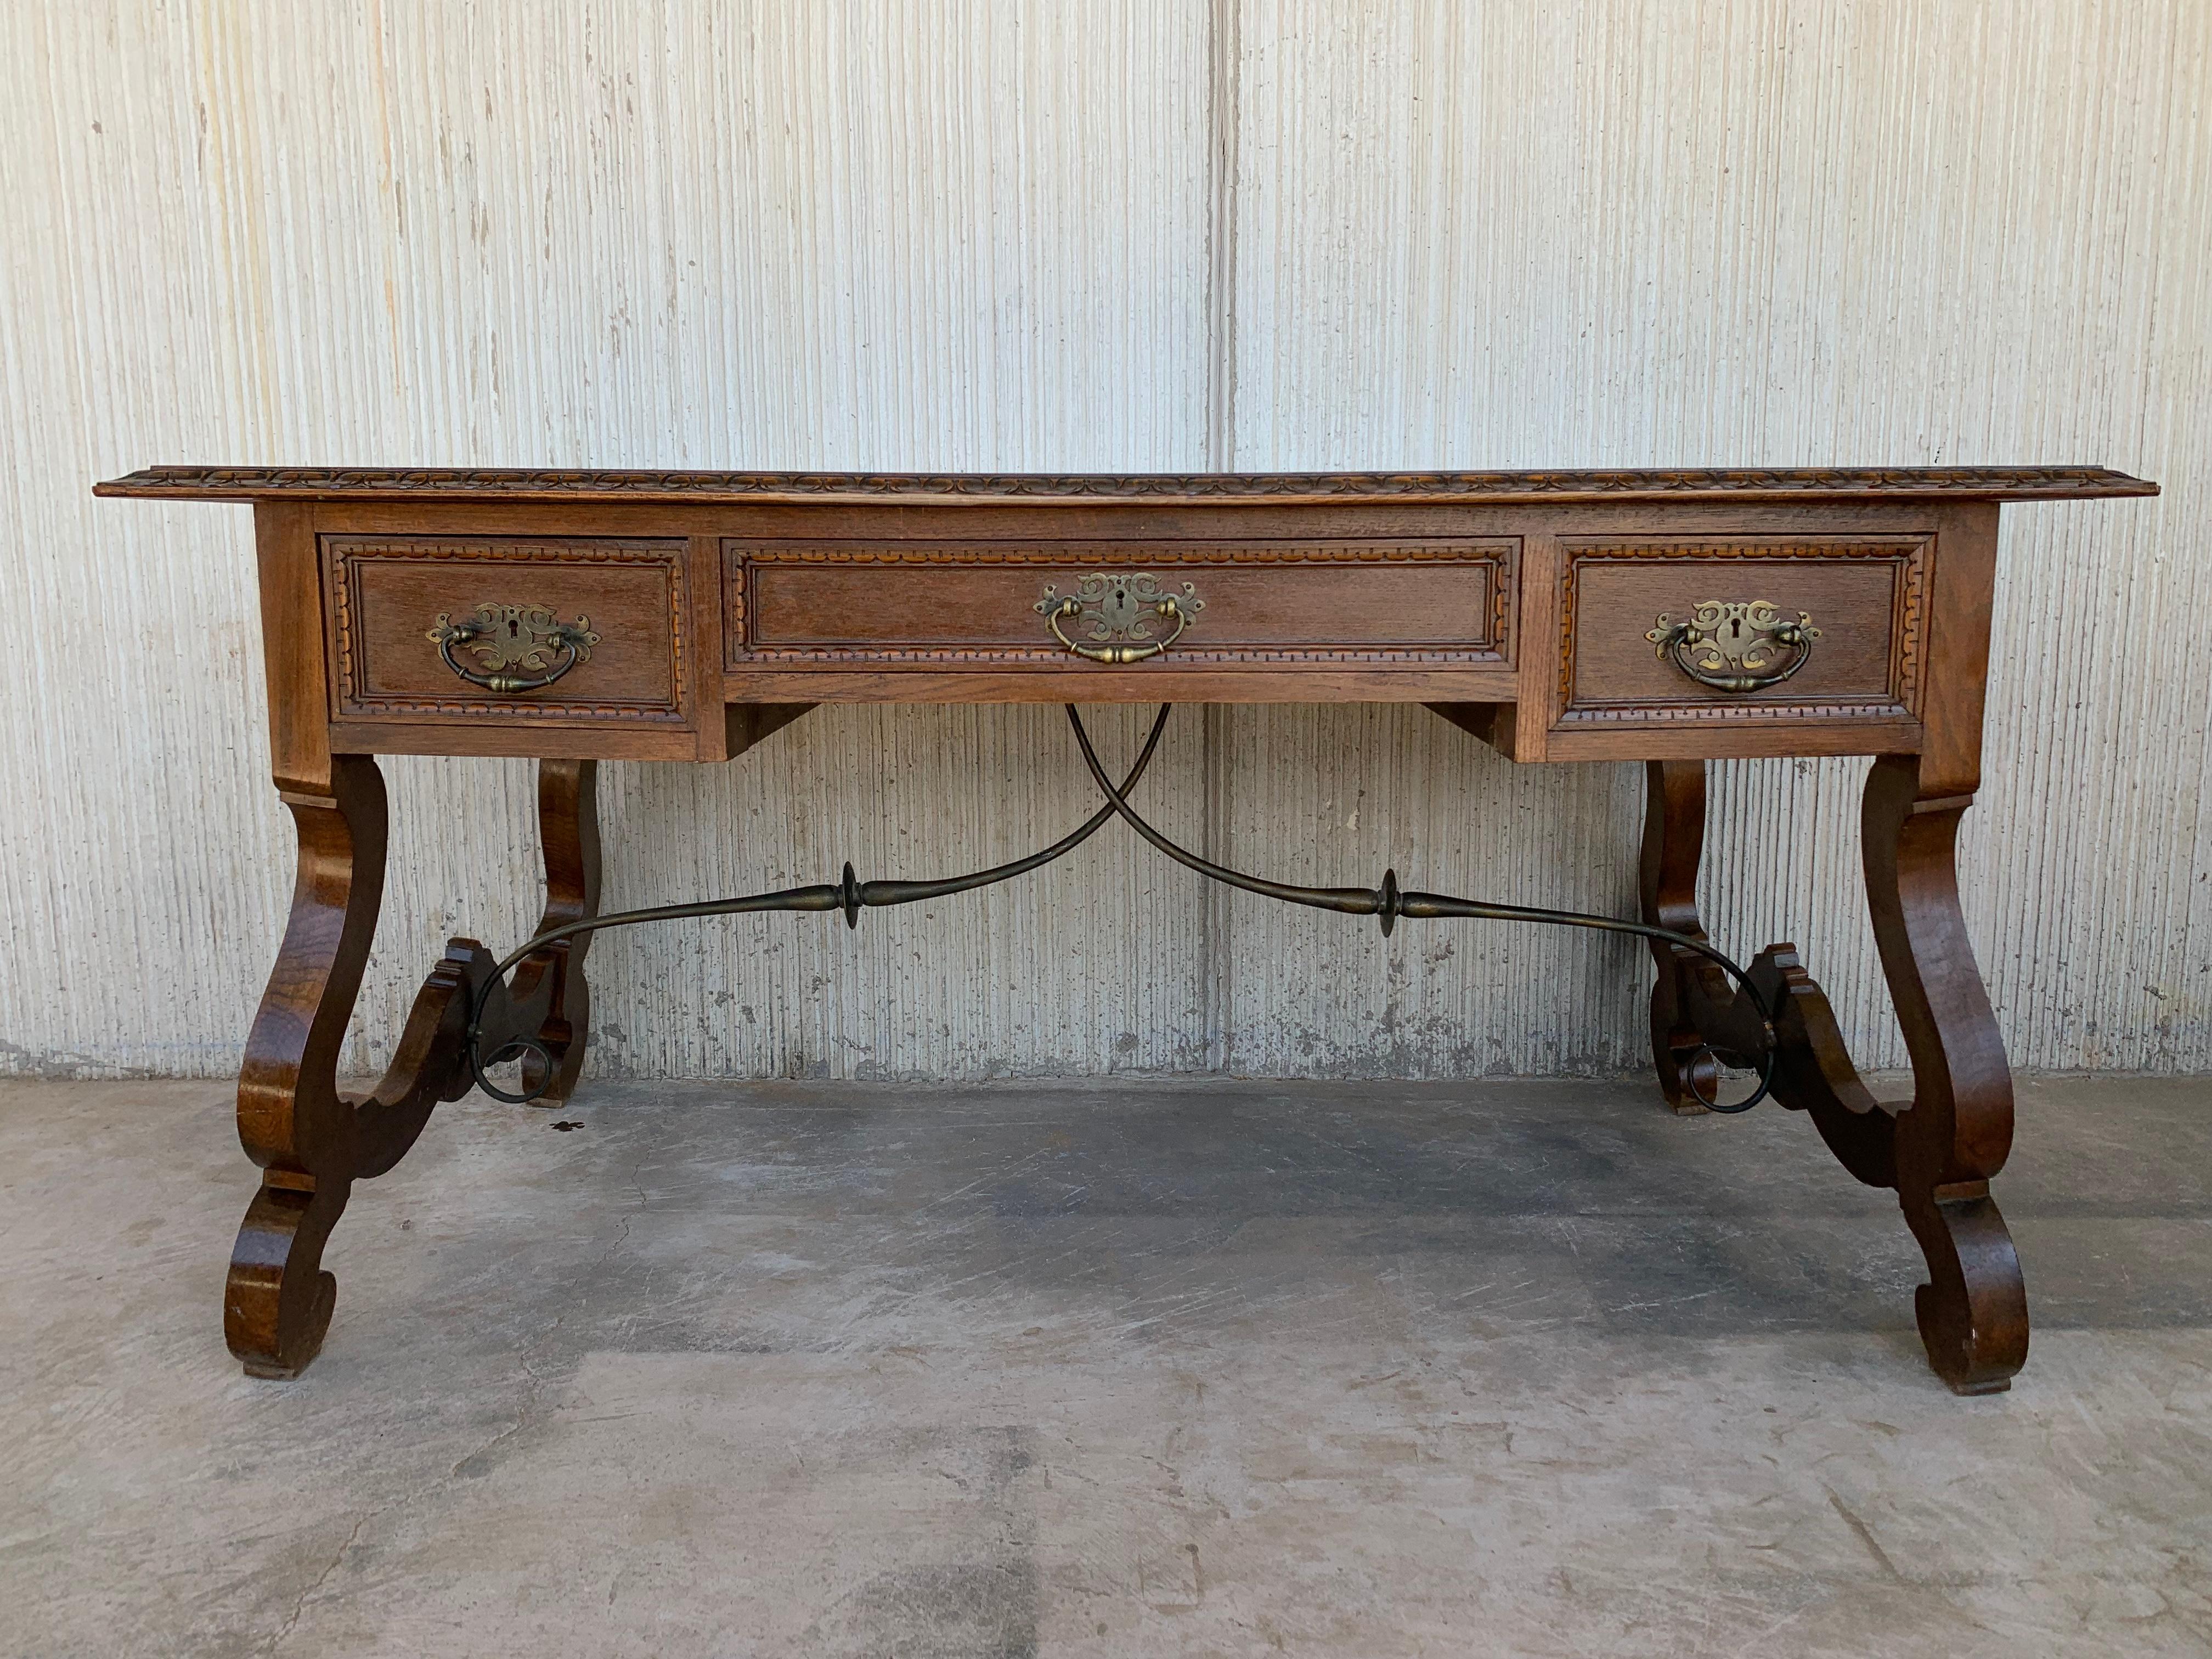 French Provincial 20th Spanish Desk or Library Carved Oak Table with Three Drawers & Stretcher